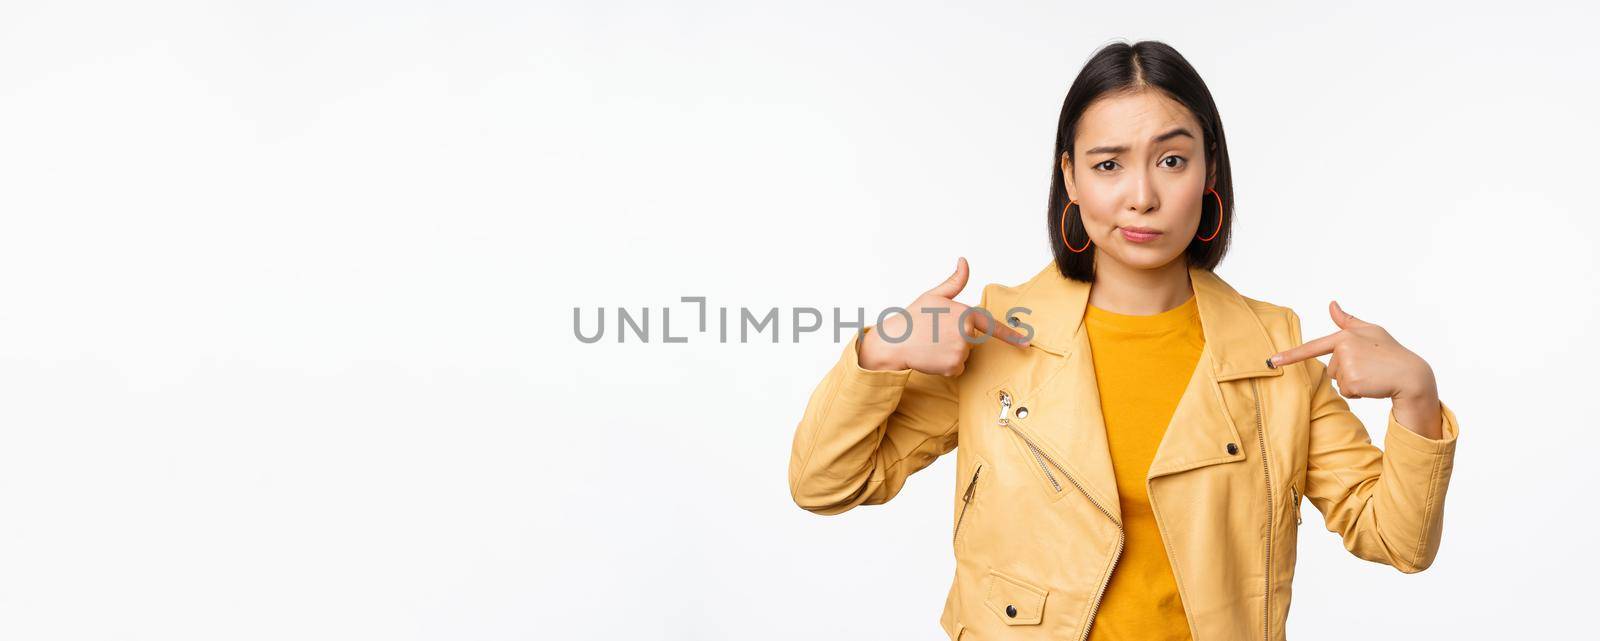 Image of unamused asian girl pointing at herself, looking with disbelief skeptical at camera, posing against white background.